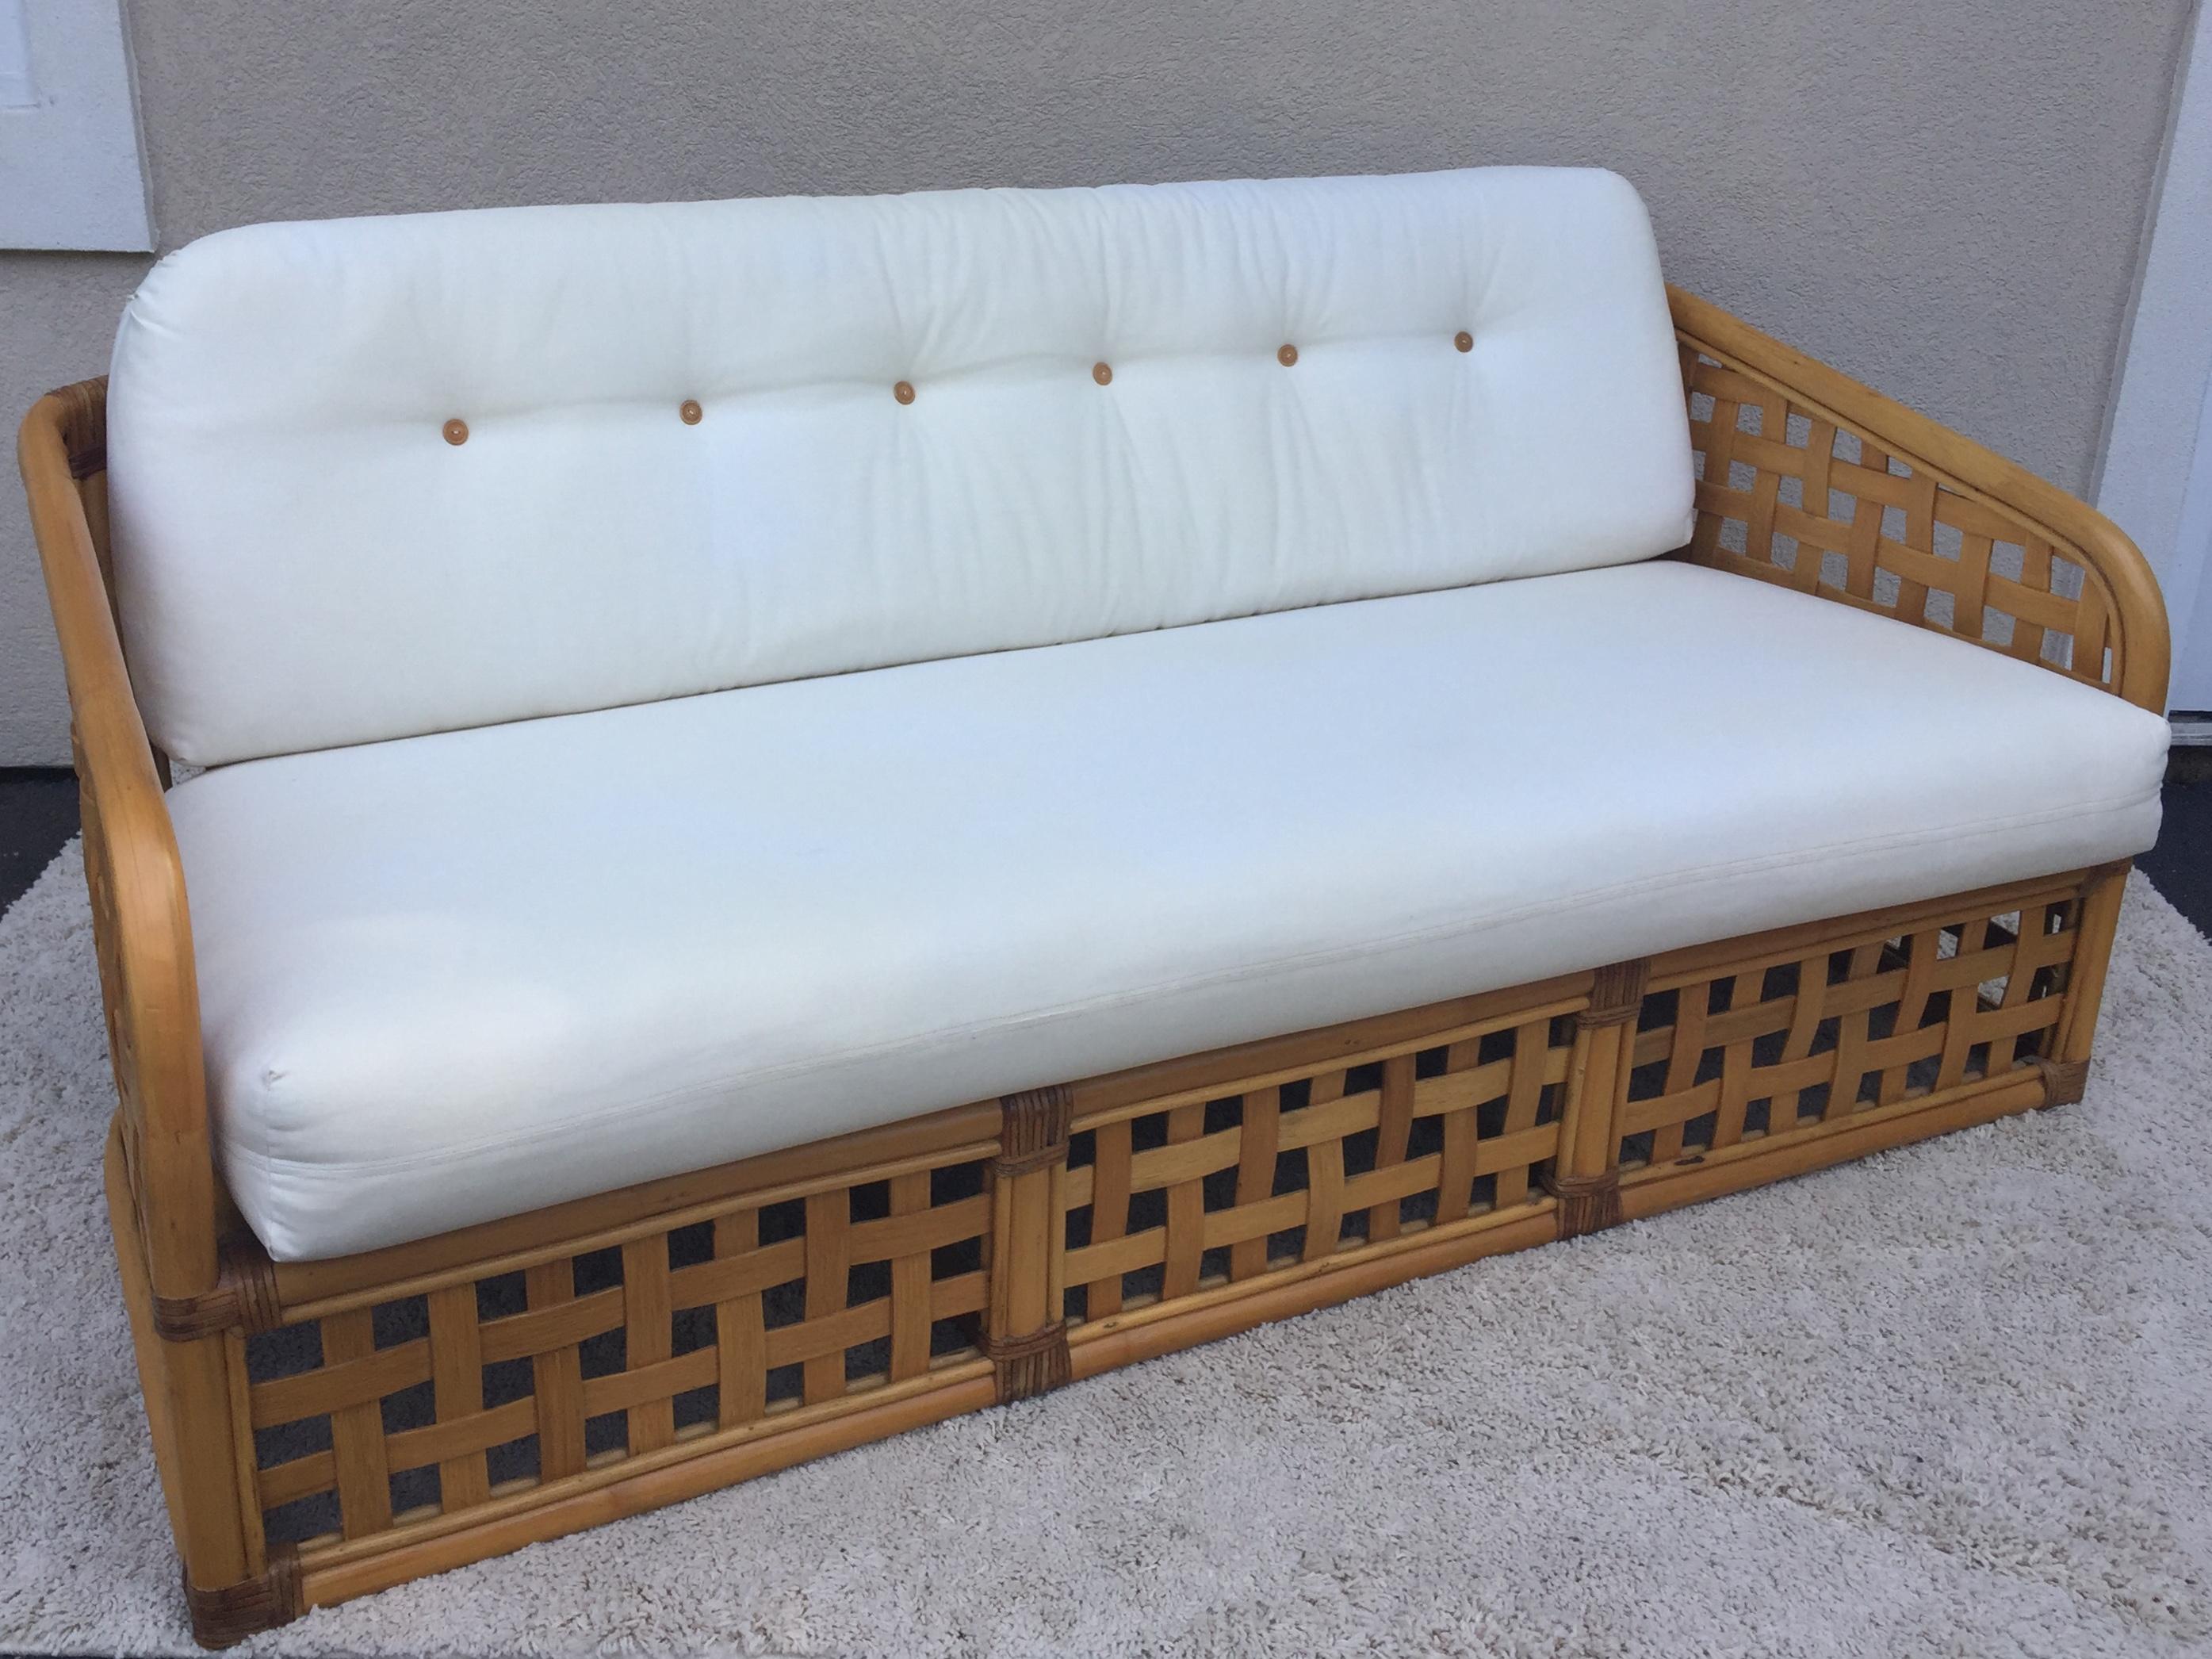 McGuire sofa, love seat, club chair and ottoman set in a square open basket design, covered in original white duck fabric, square design construction with bamboo buttons tufts.
Love seat 47''x 30''x 27'' deep 17.50 seat
Sofa 69 x 30 high x 27 deep